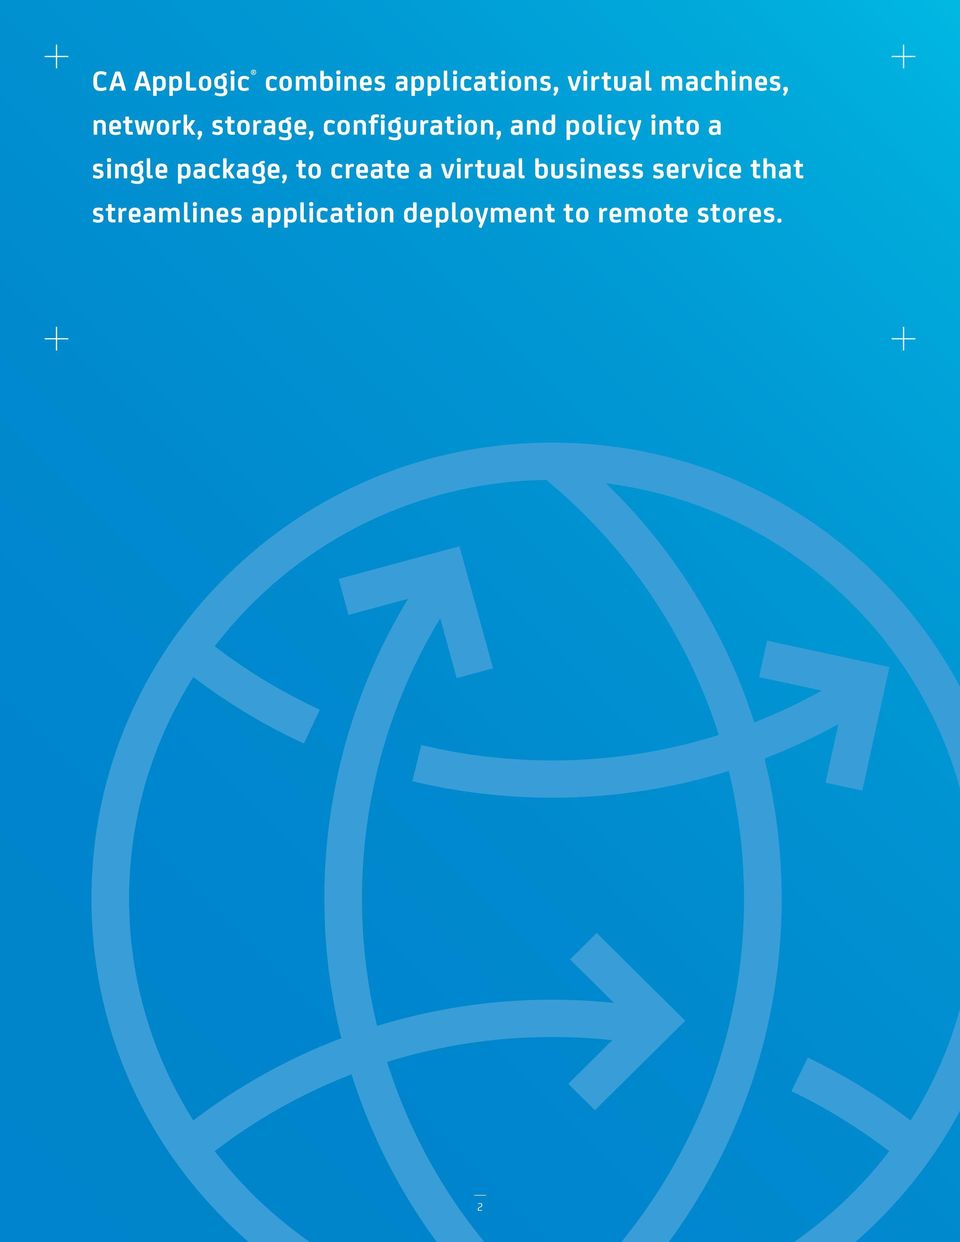 single package, to create a virtual business service